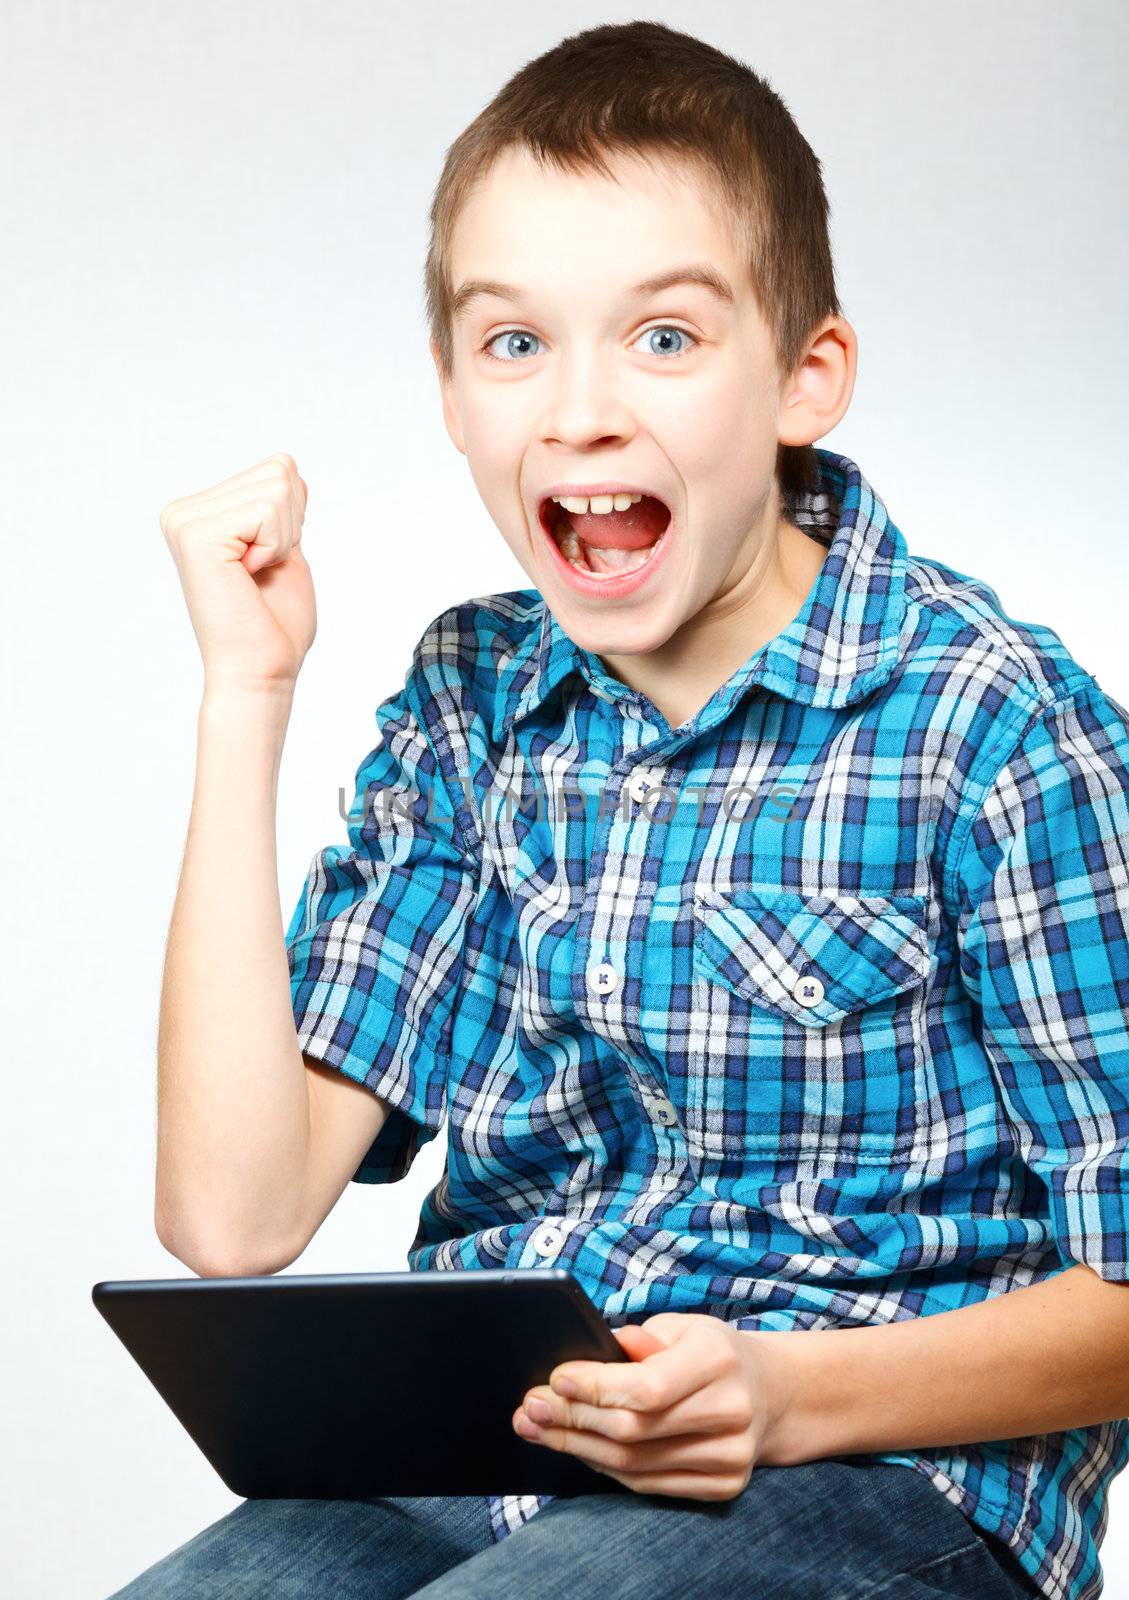 Young boy pumps his fist and cheers holding a touch pad